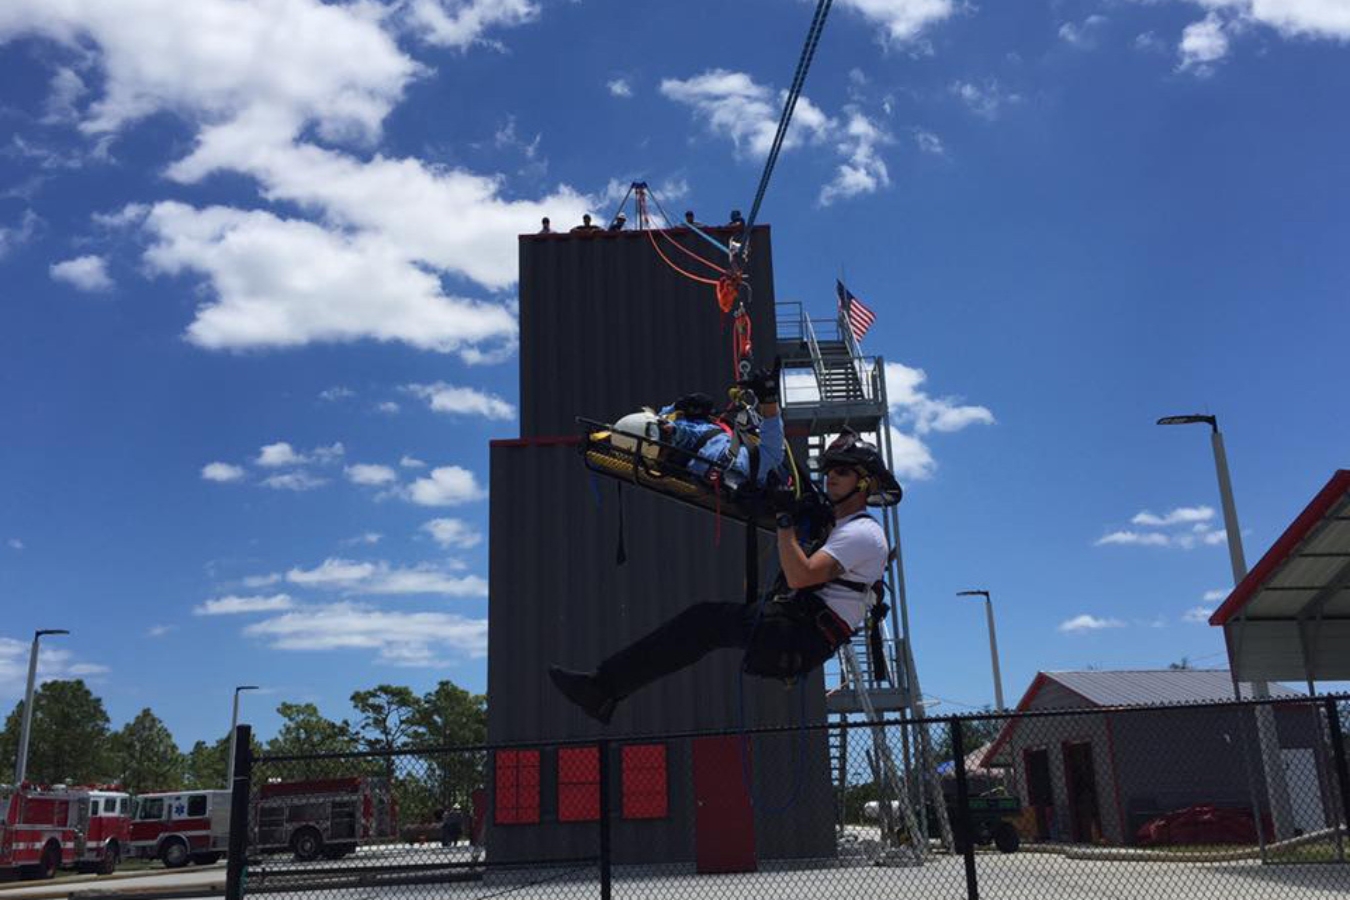 Practical exercise at Palm Bay's fire academy: Student performing rappelling while simulating a rescue